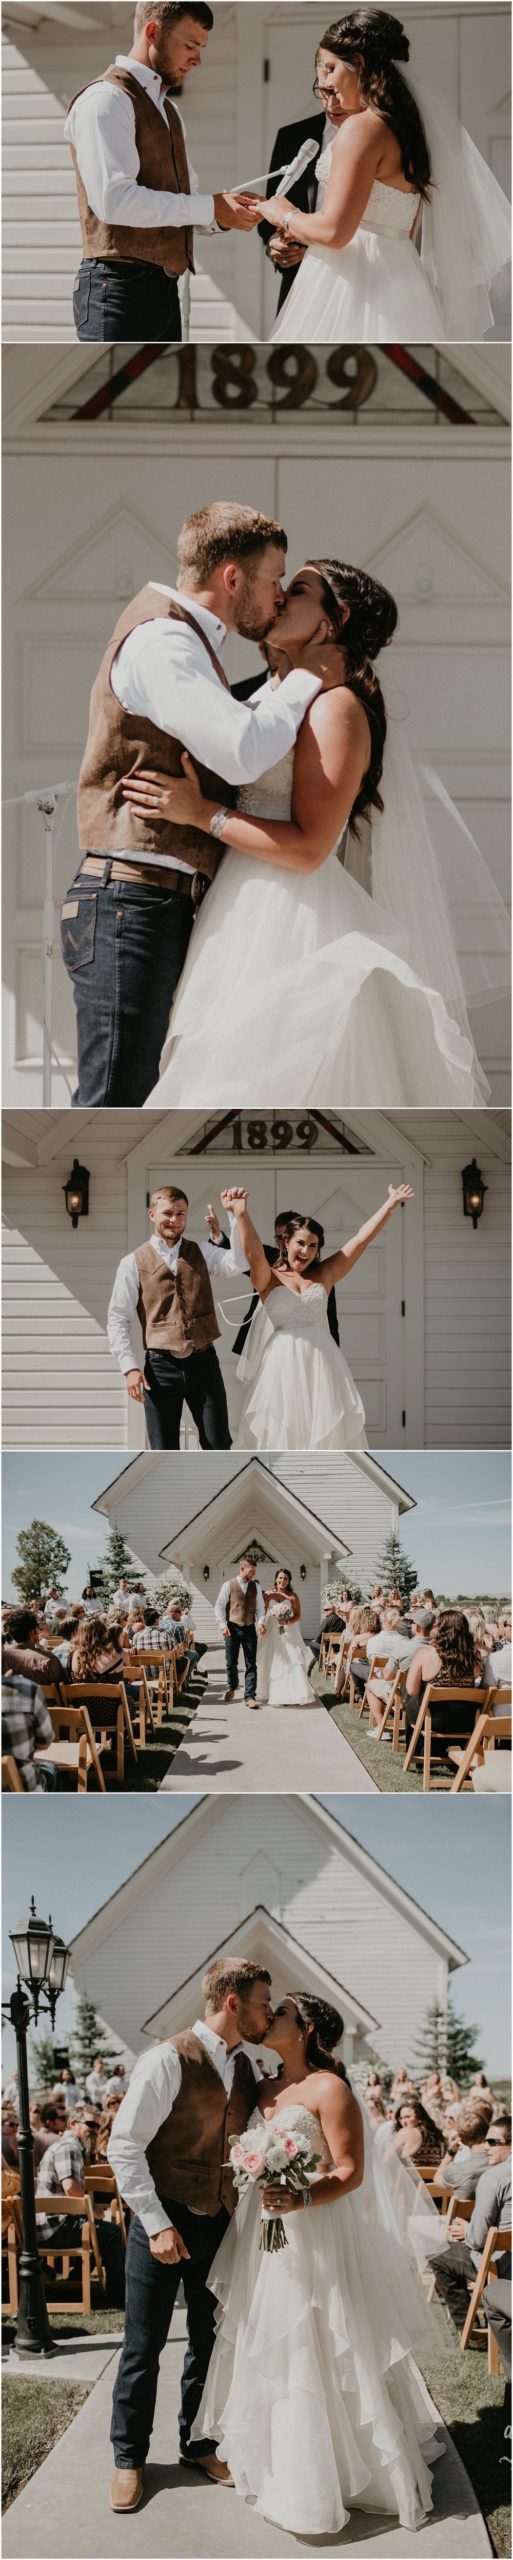 Boise Wedding Photographer Makayla Madden Photography Still Water Hollow Boise Wedding Venue Country Chic Rustic Bride and Groom Idaho Bride Summer White Chapel